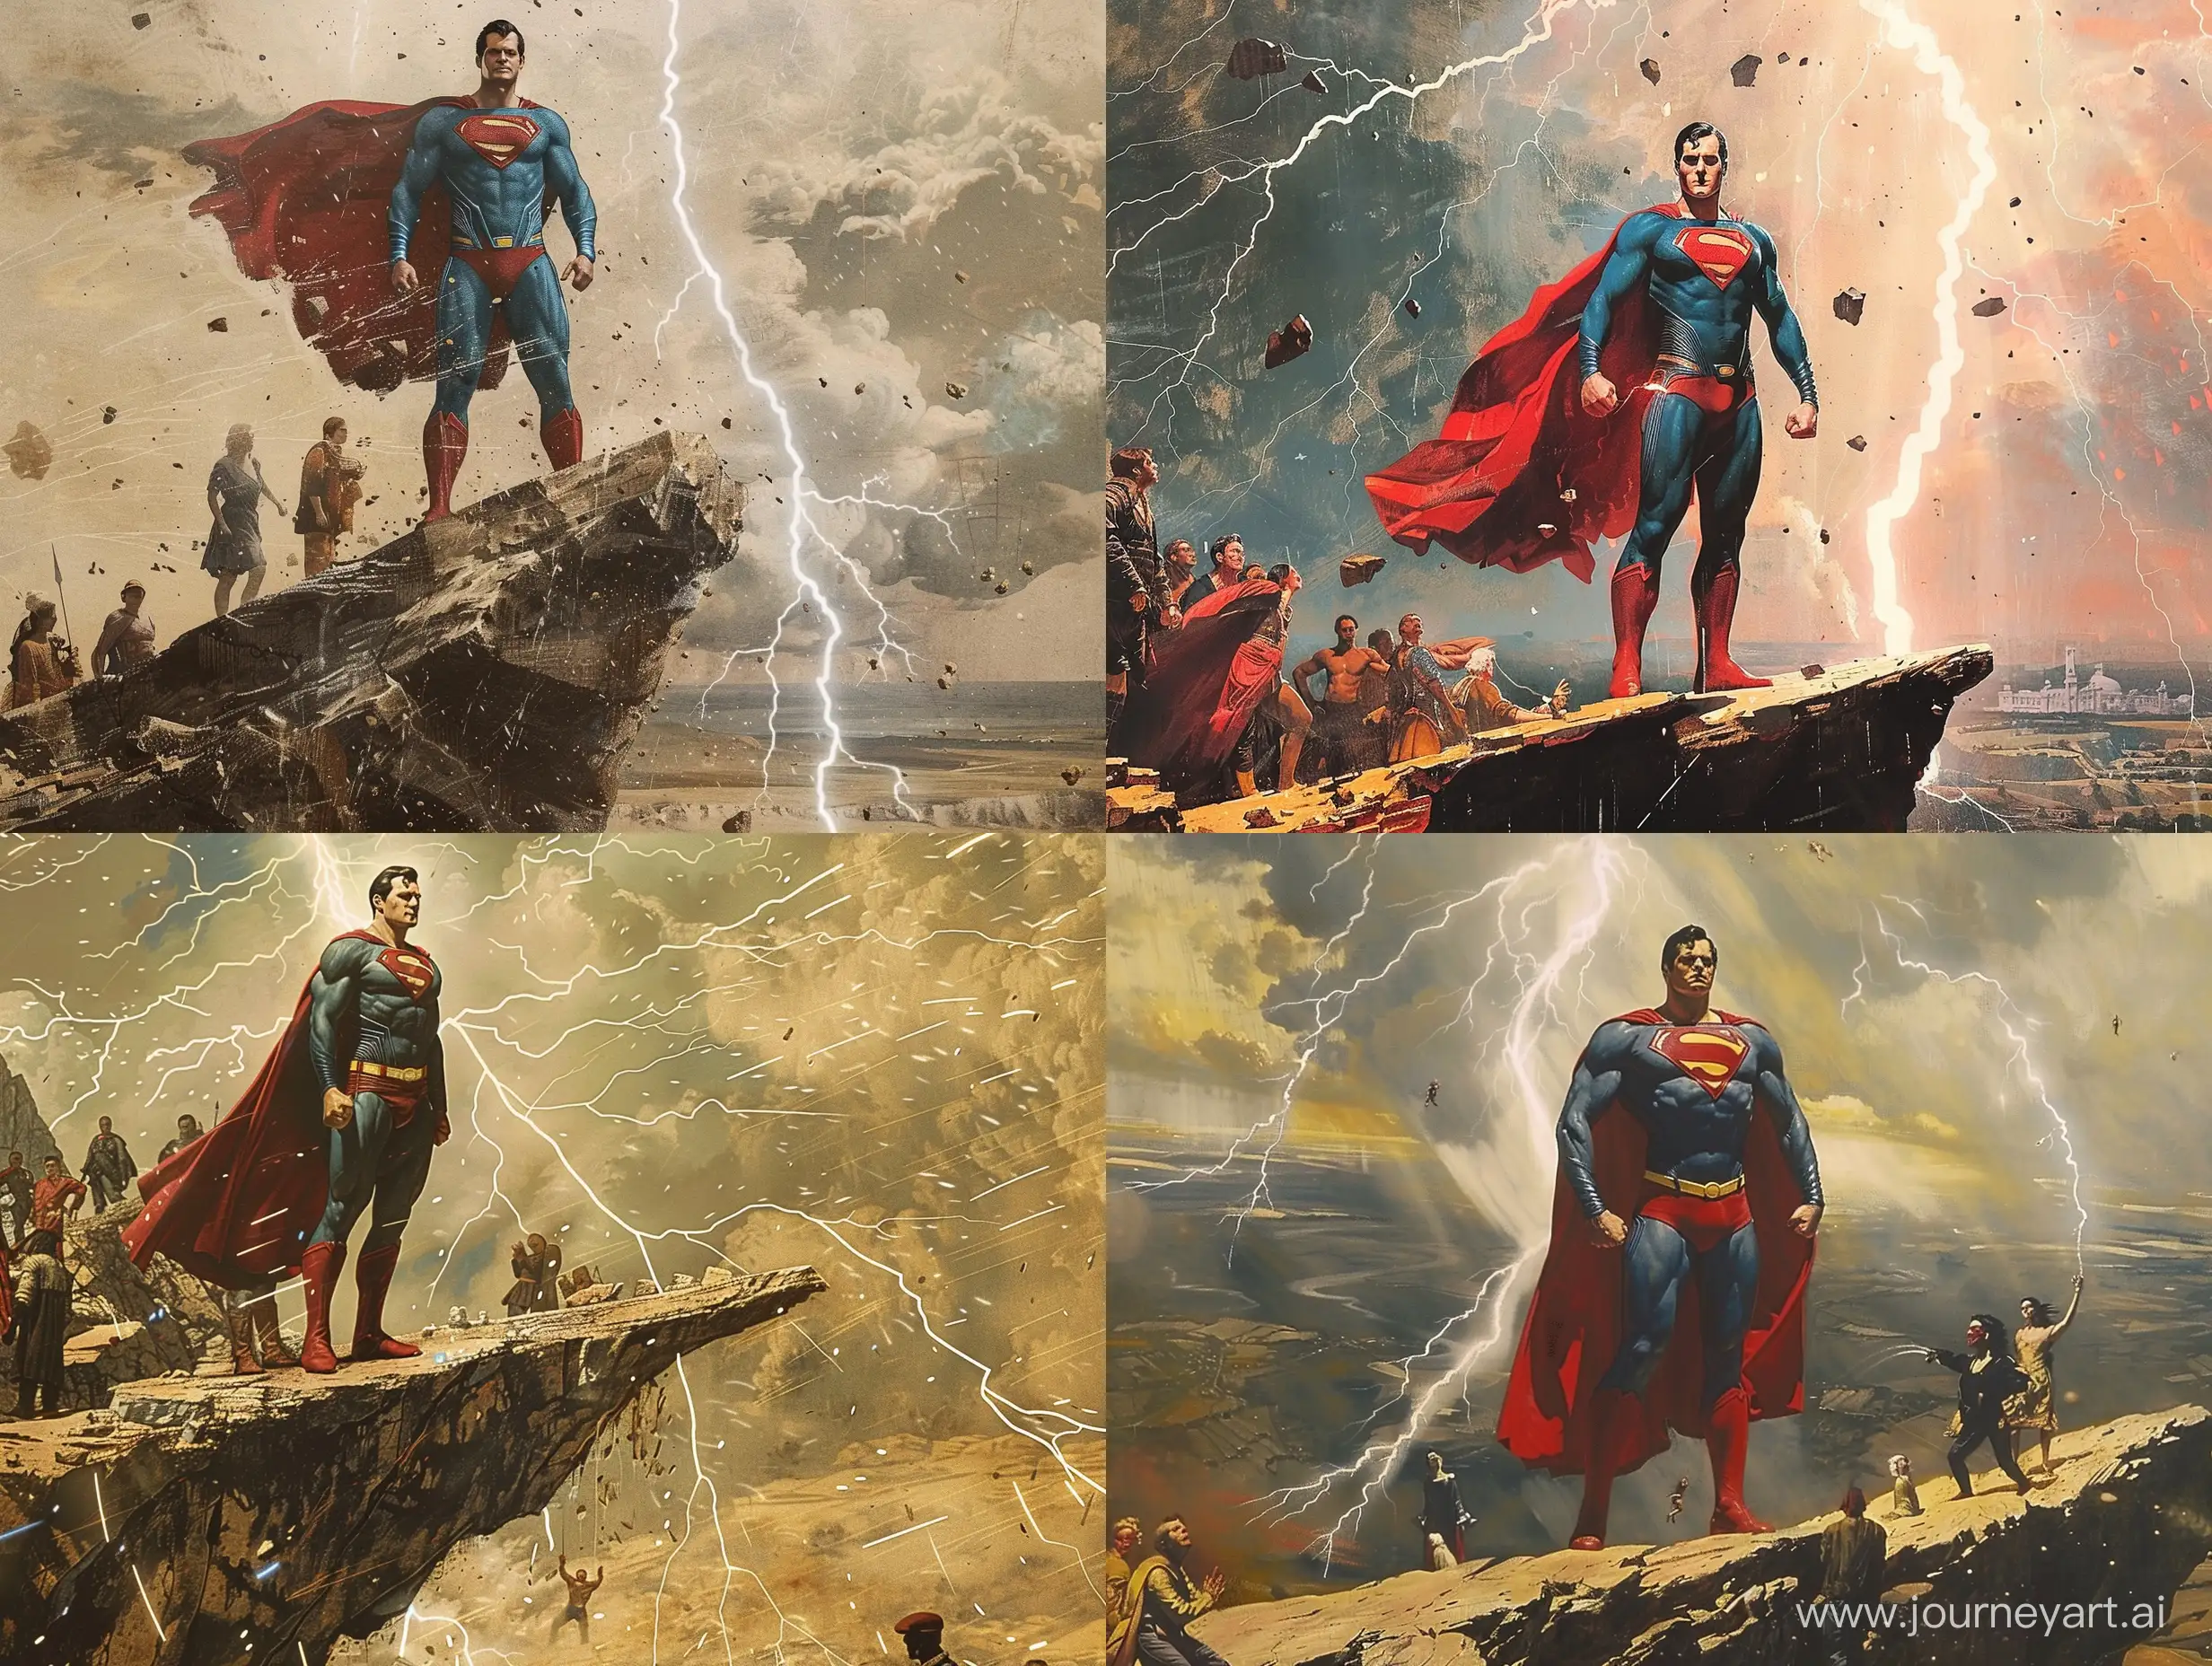 Epic-Renaissance-Superman-Painting-with-Lightning-and-Spectators